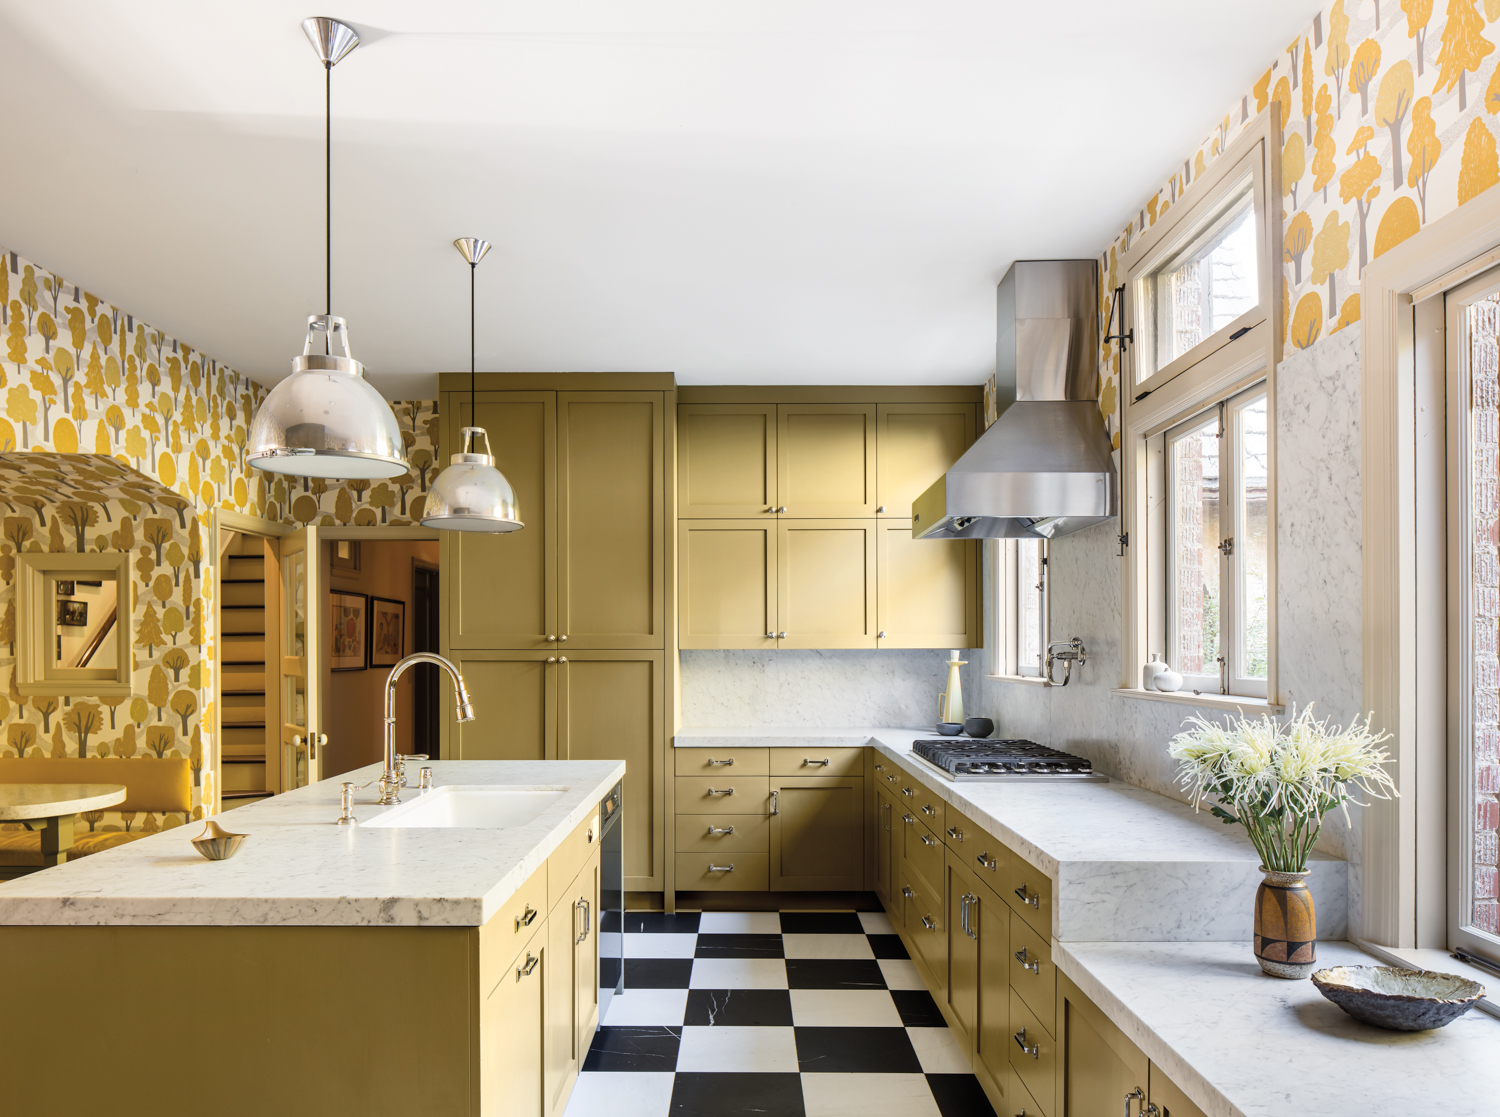 Kitchen with yellow cabinetry, white marble countertops and black-and-white checkered floors